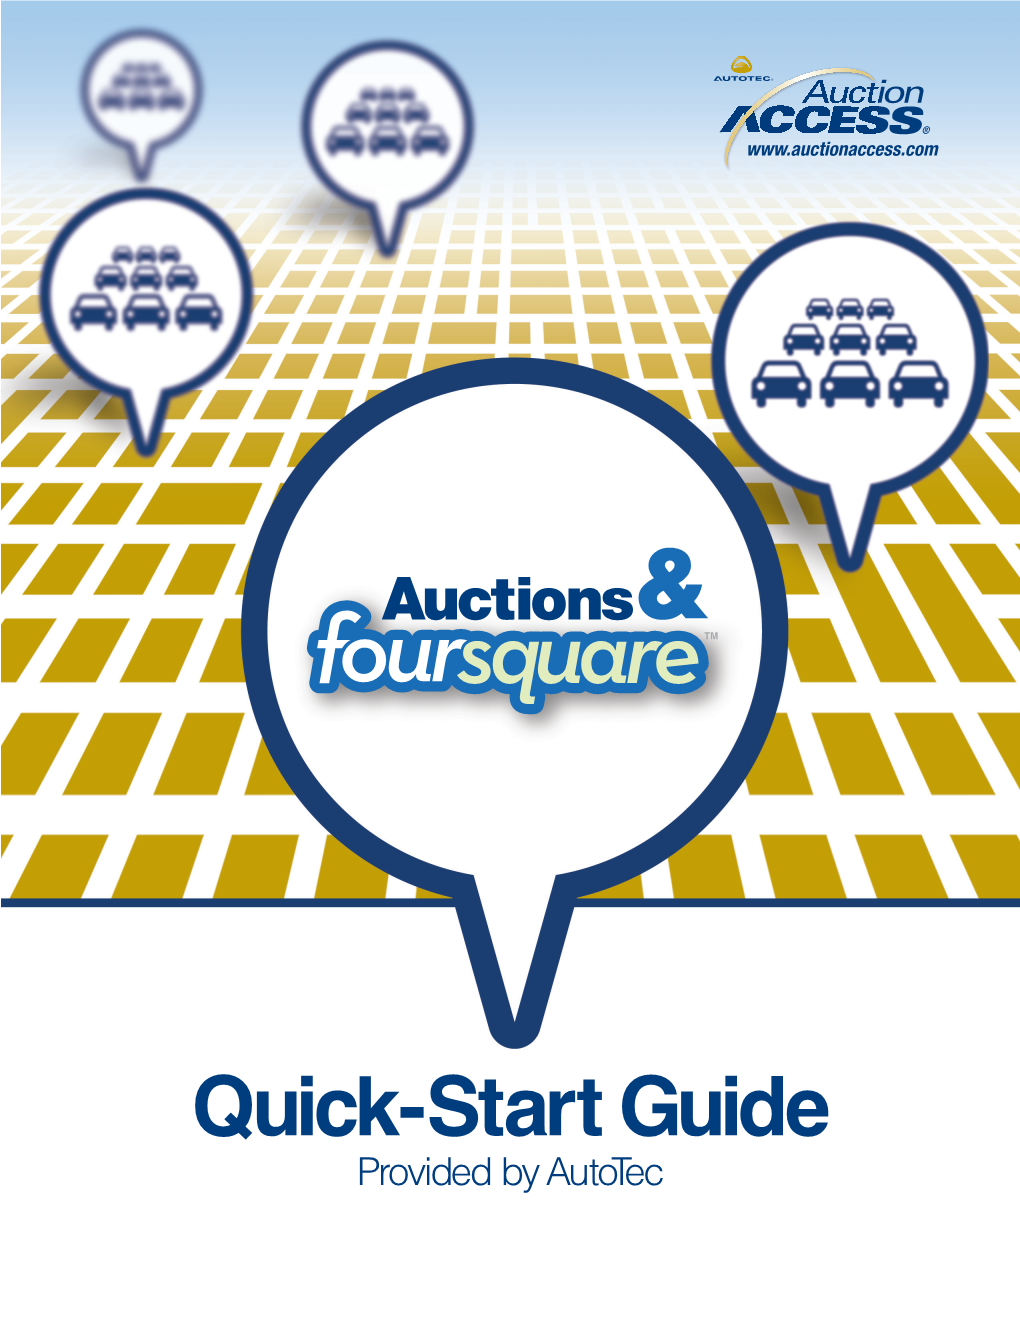 A Foursquare How-To Guide for an Automotive